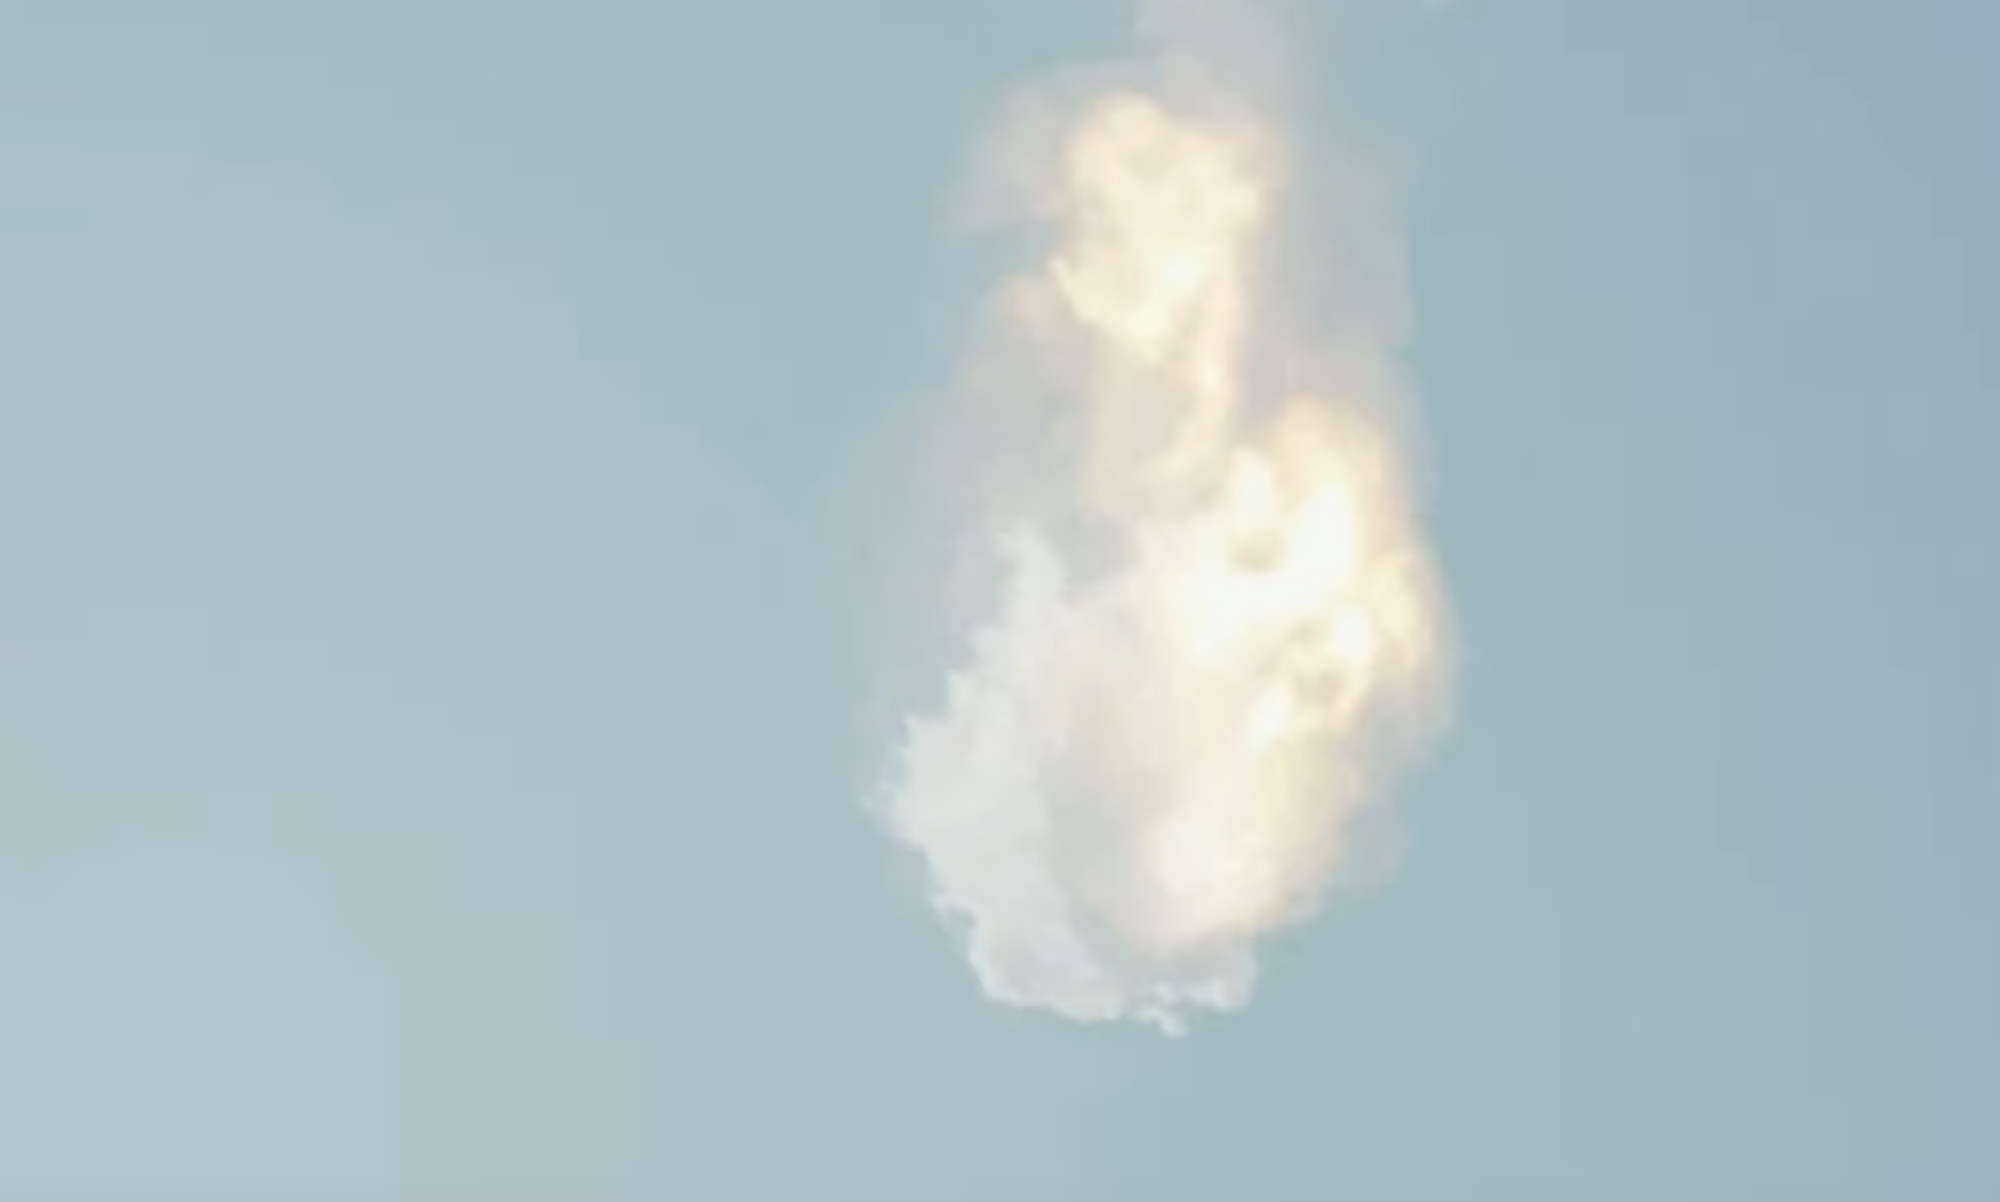 Starship exploding during first attempt at flight test